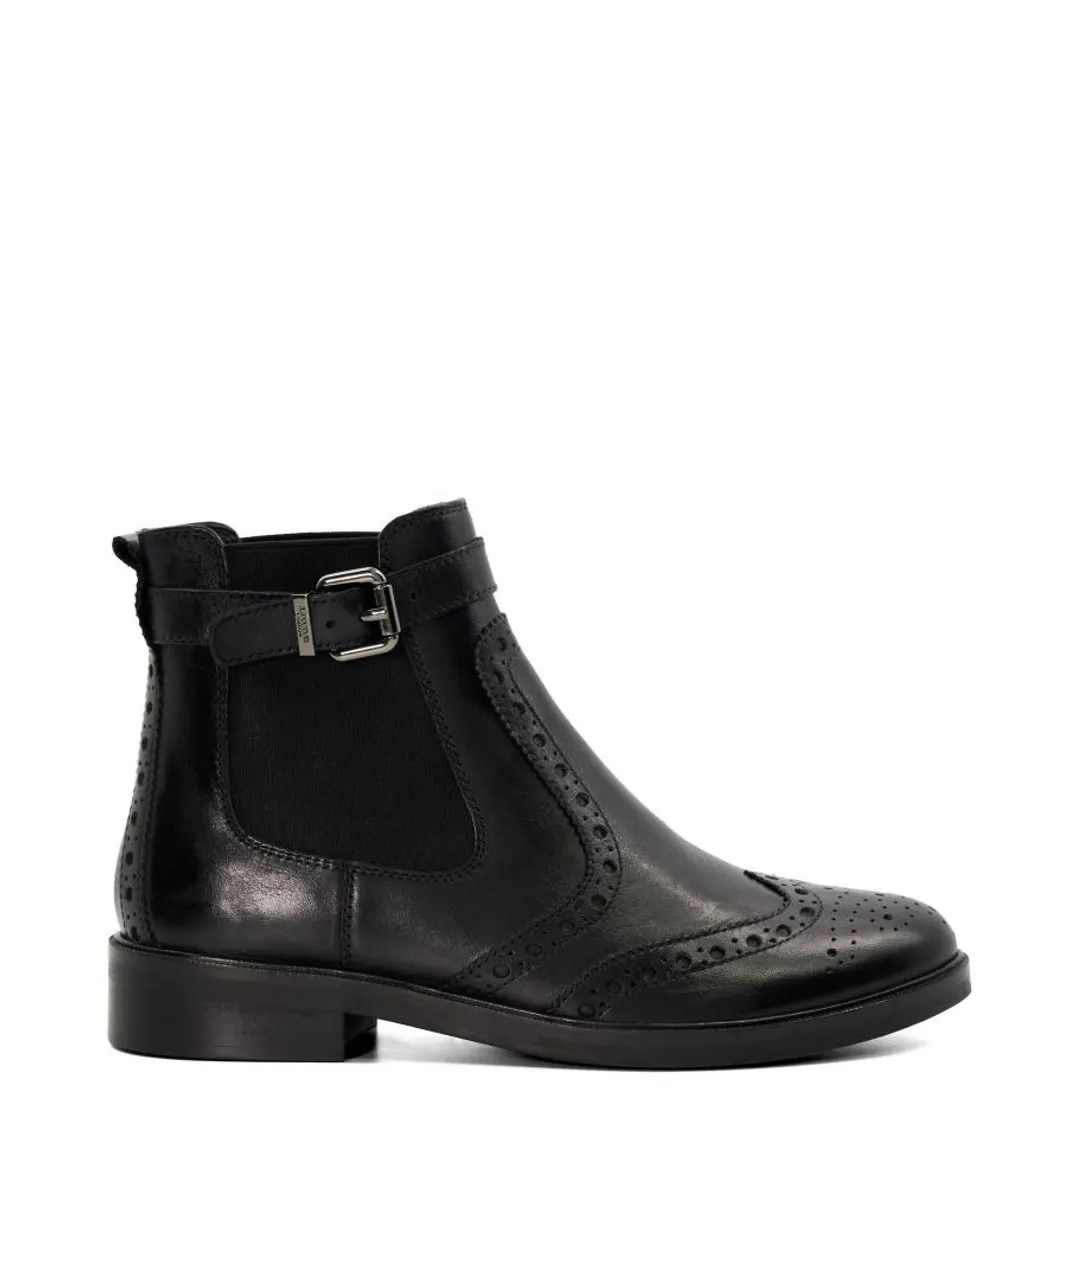 Dune London Womens Ladies Chelsea Boots - Question - Black Leather (archived)